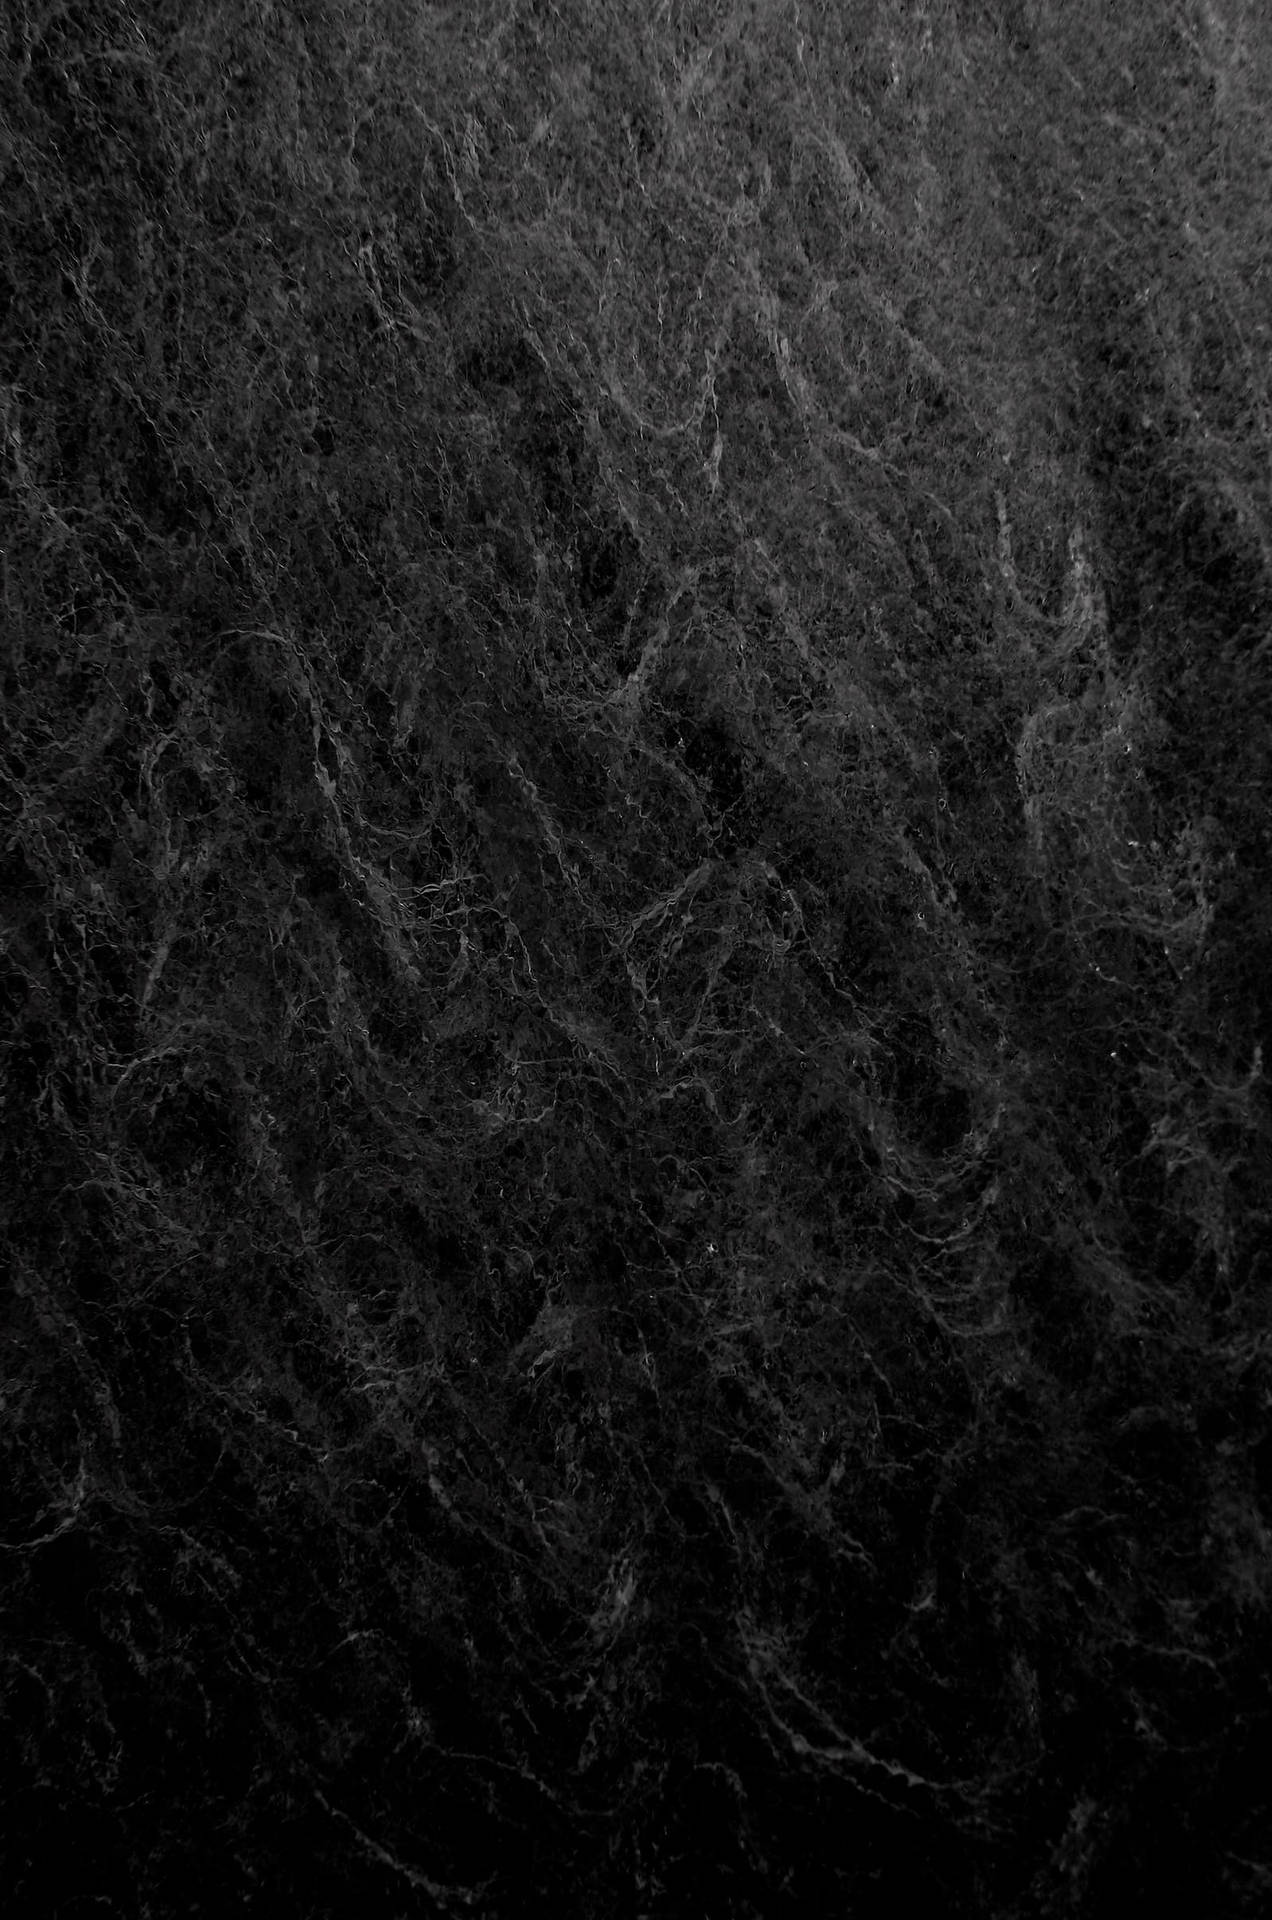 Abstract Waves Black And Grey Iphone Background